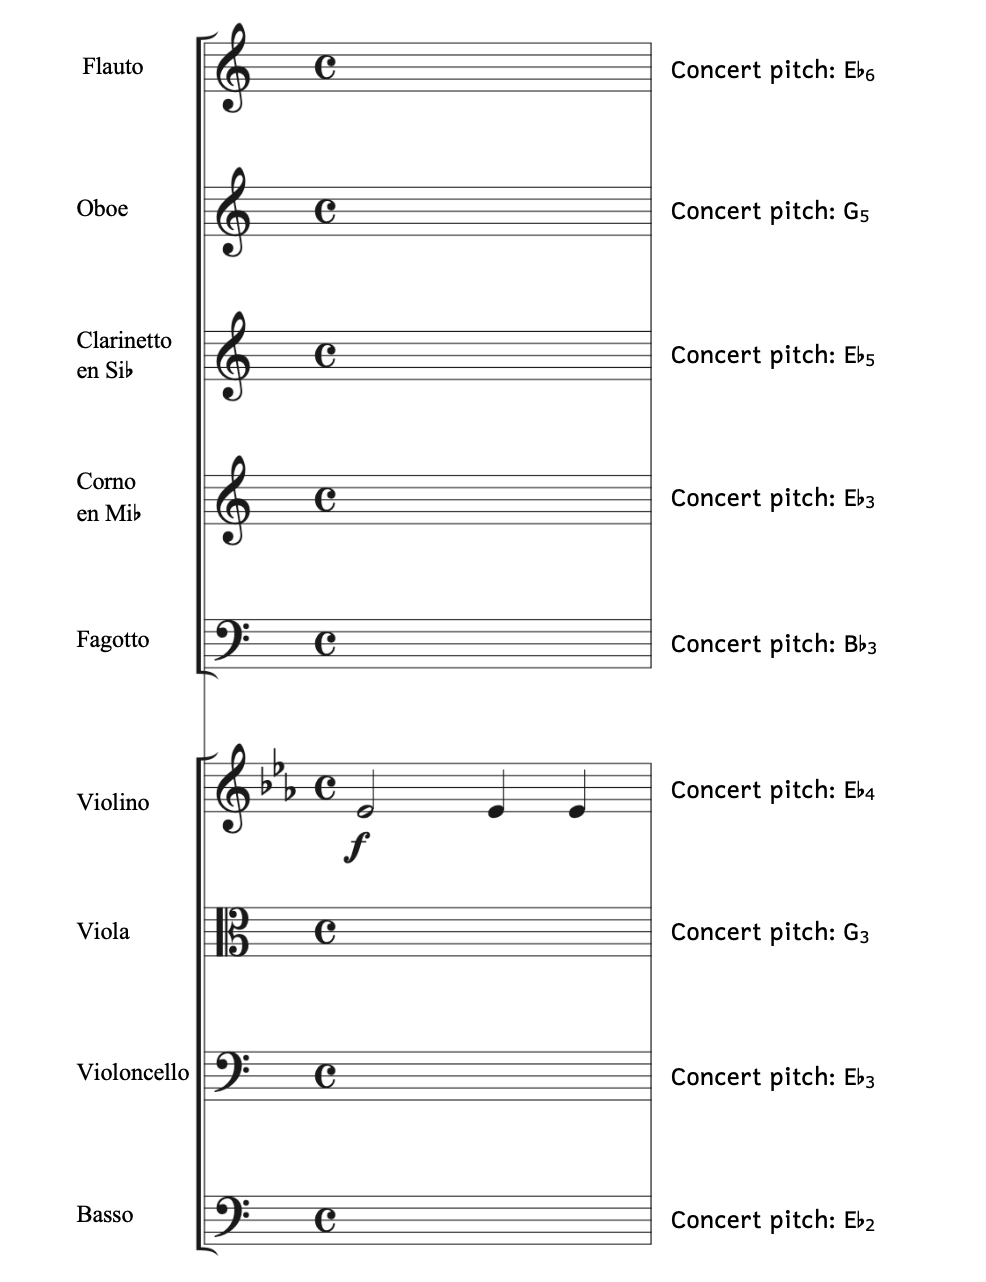 The violin is in E-flat major with a half note and two quarter notes on E-flat4. Write the key signatures and notes for the following instruments. Flute. Oboe. Clarinet in B-flat. Horn in E-flat. Bassoon. Viola. Cello. Double bass.